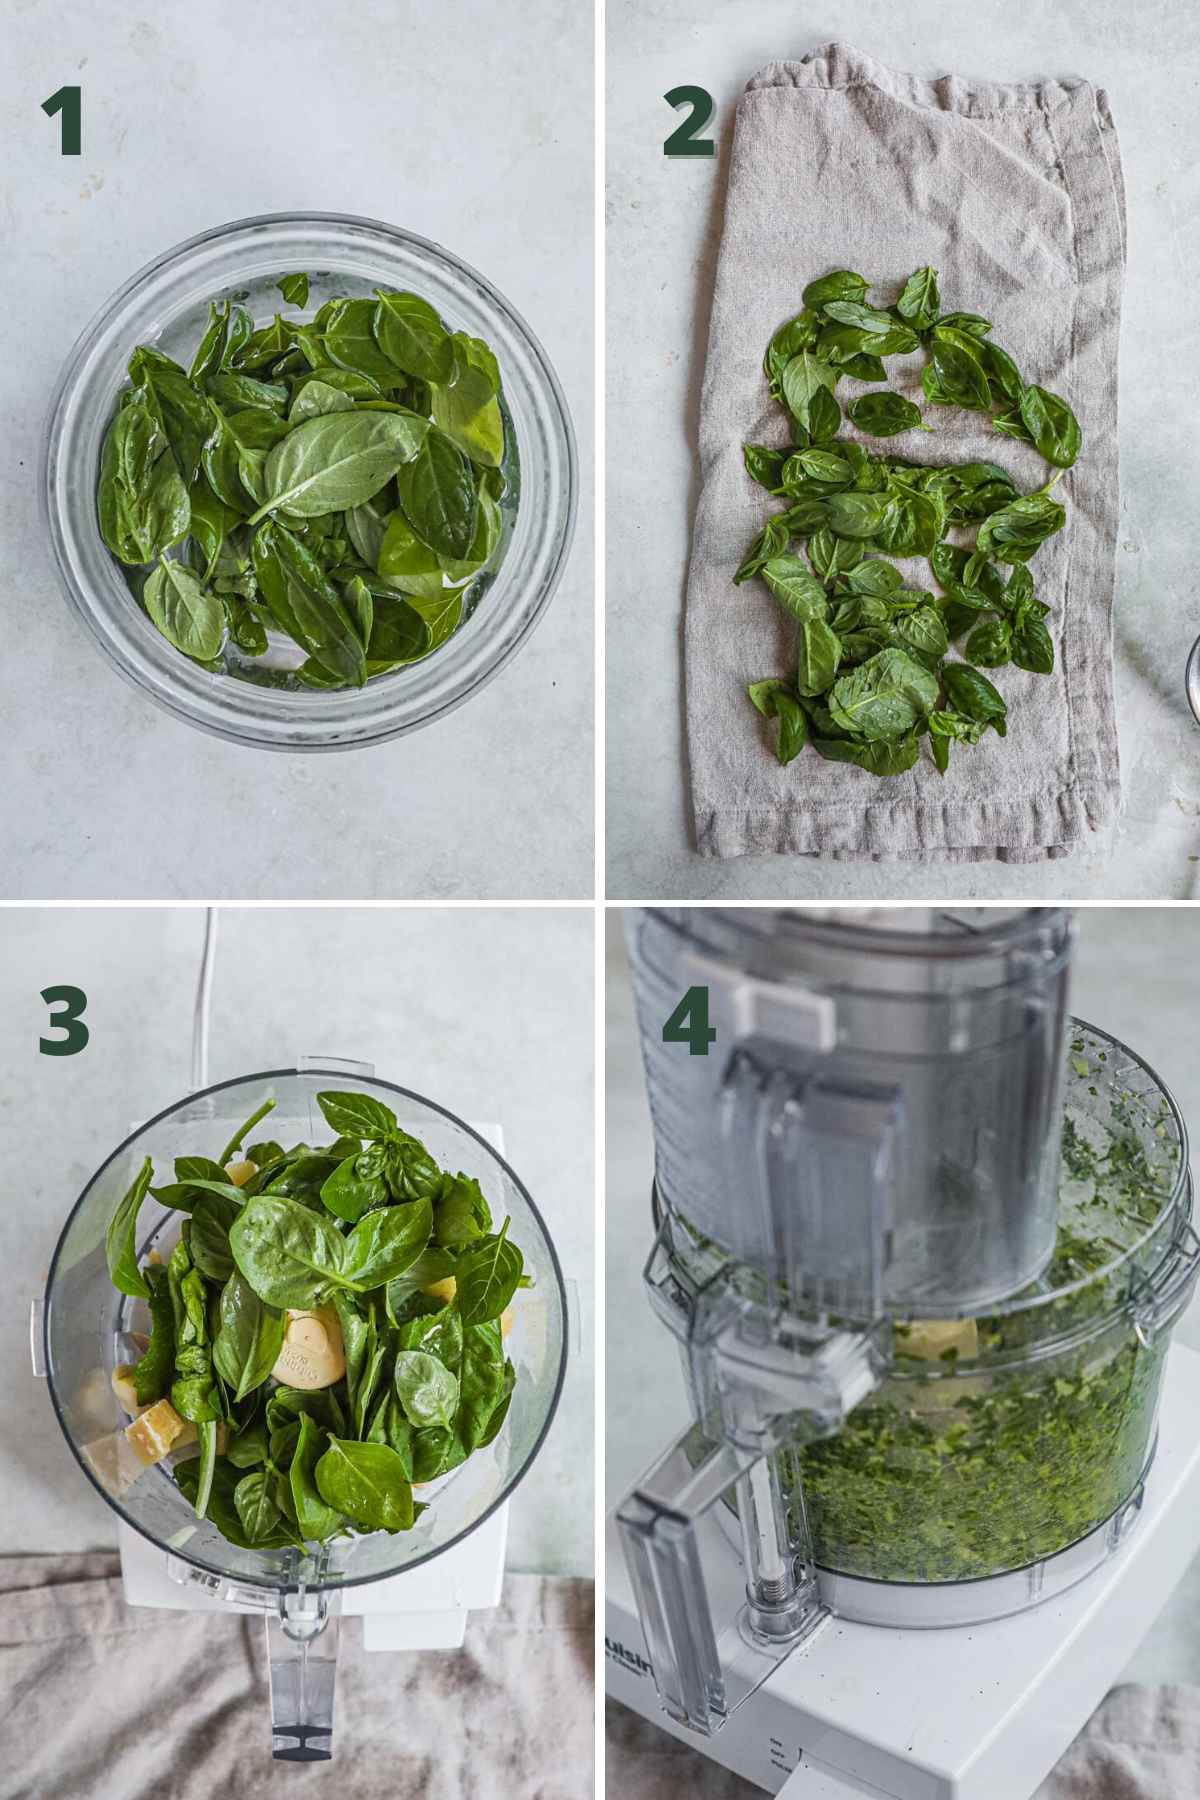 Step to make pesto alla genovese (classic basil pesto), chilling and drying basil leaves, adding cheese, garlic, basil, and pine nuts to food processor, and blending.